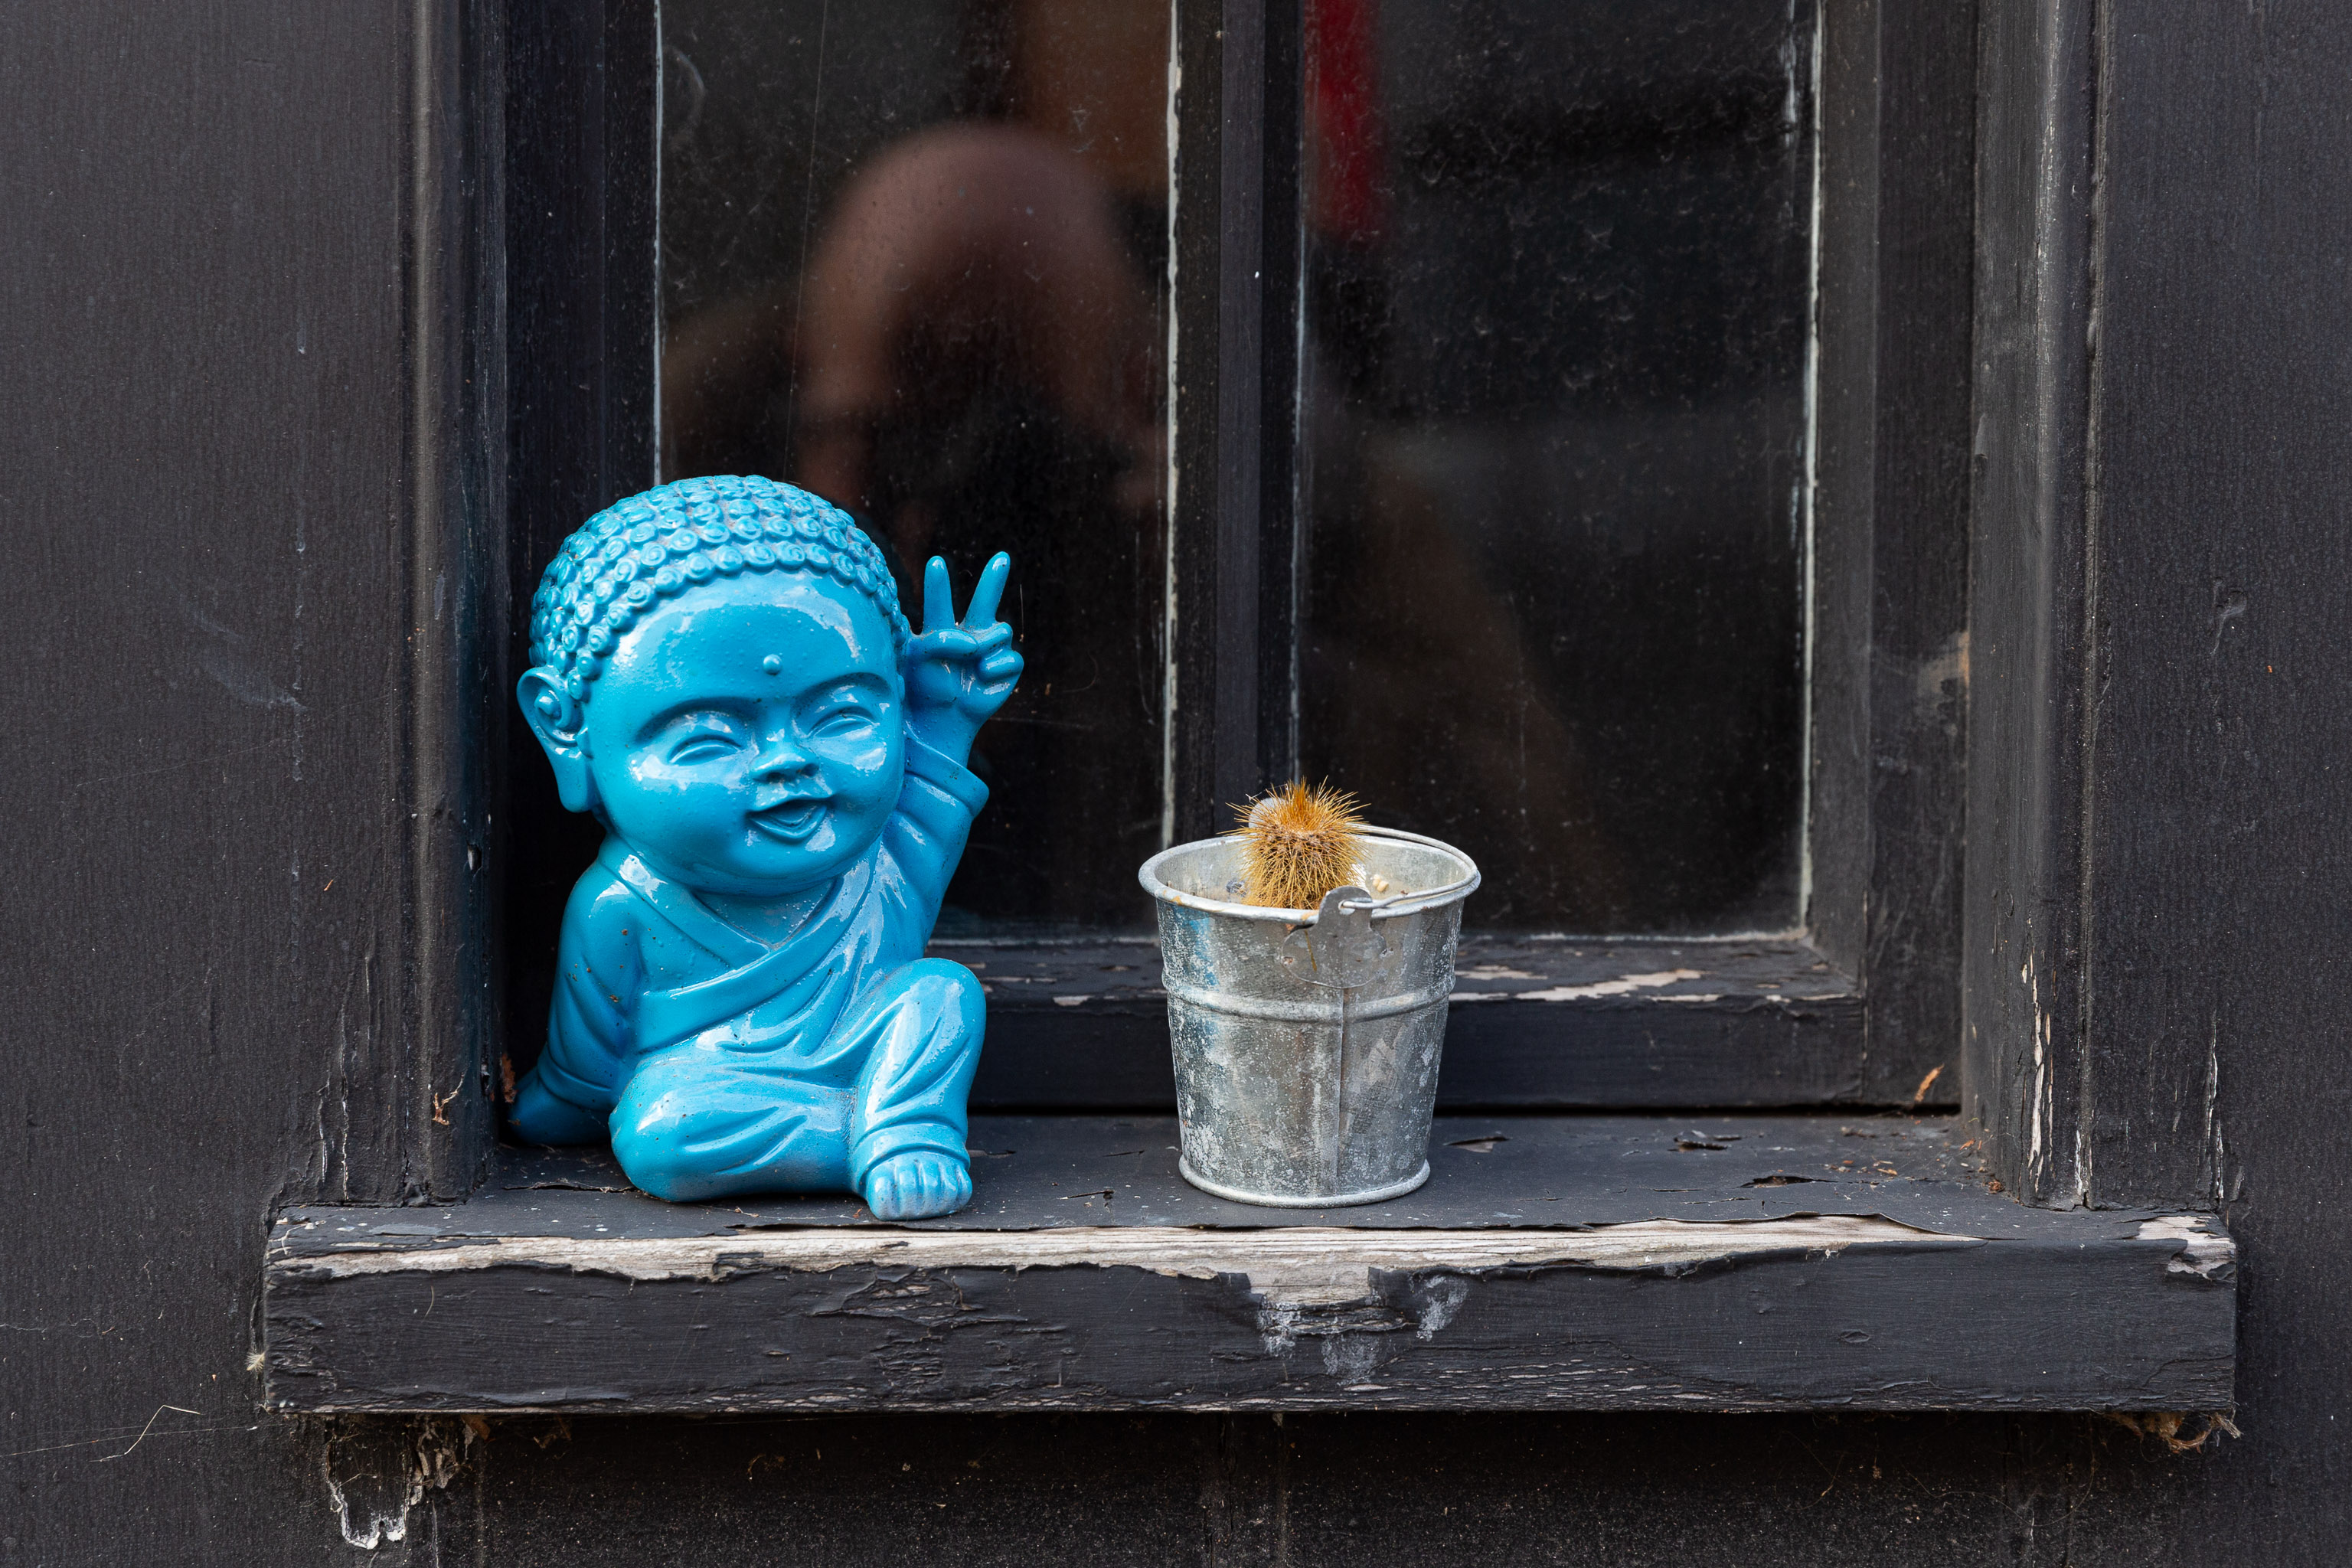 Tiny Buddha
He appears to be flicking the V sign at my reflection. Not very chill, Buddha.
